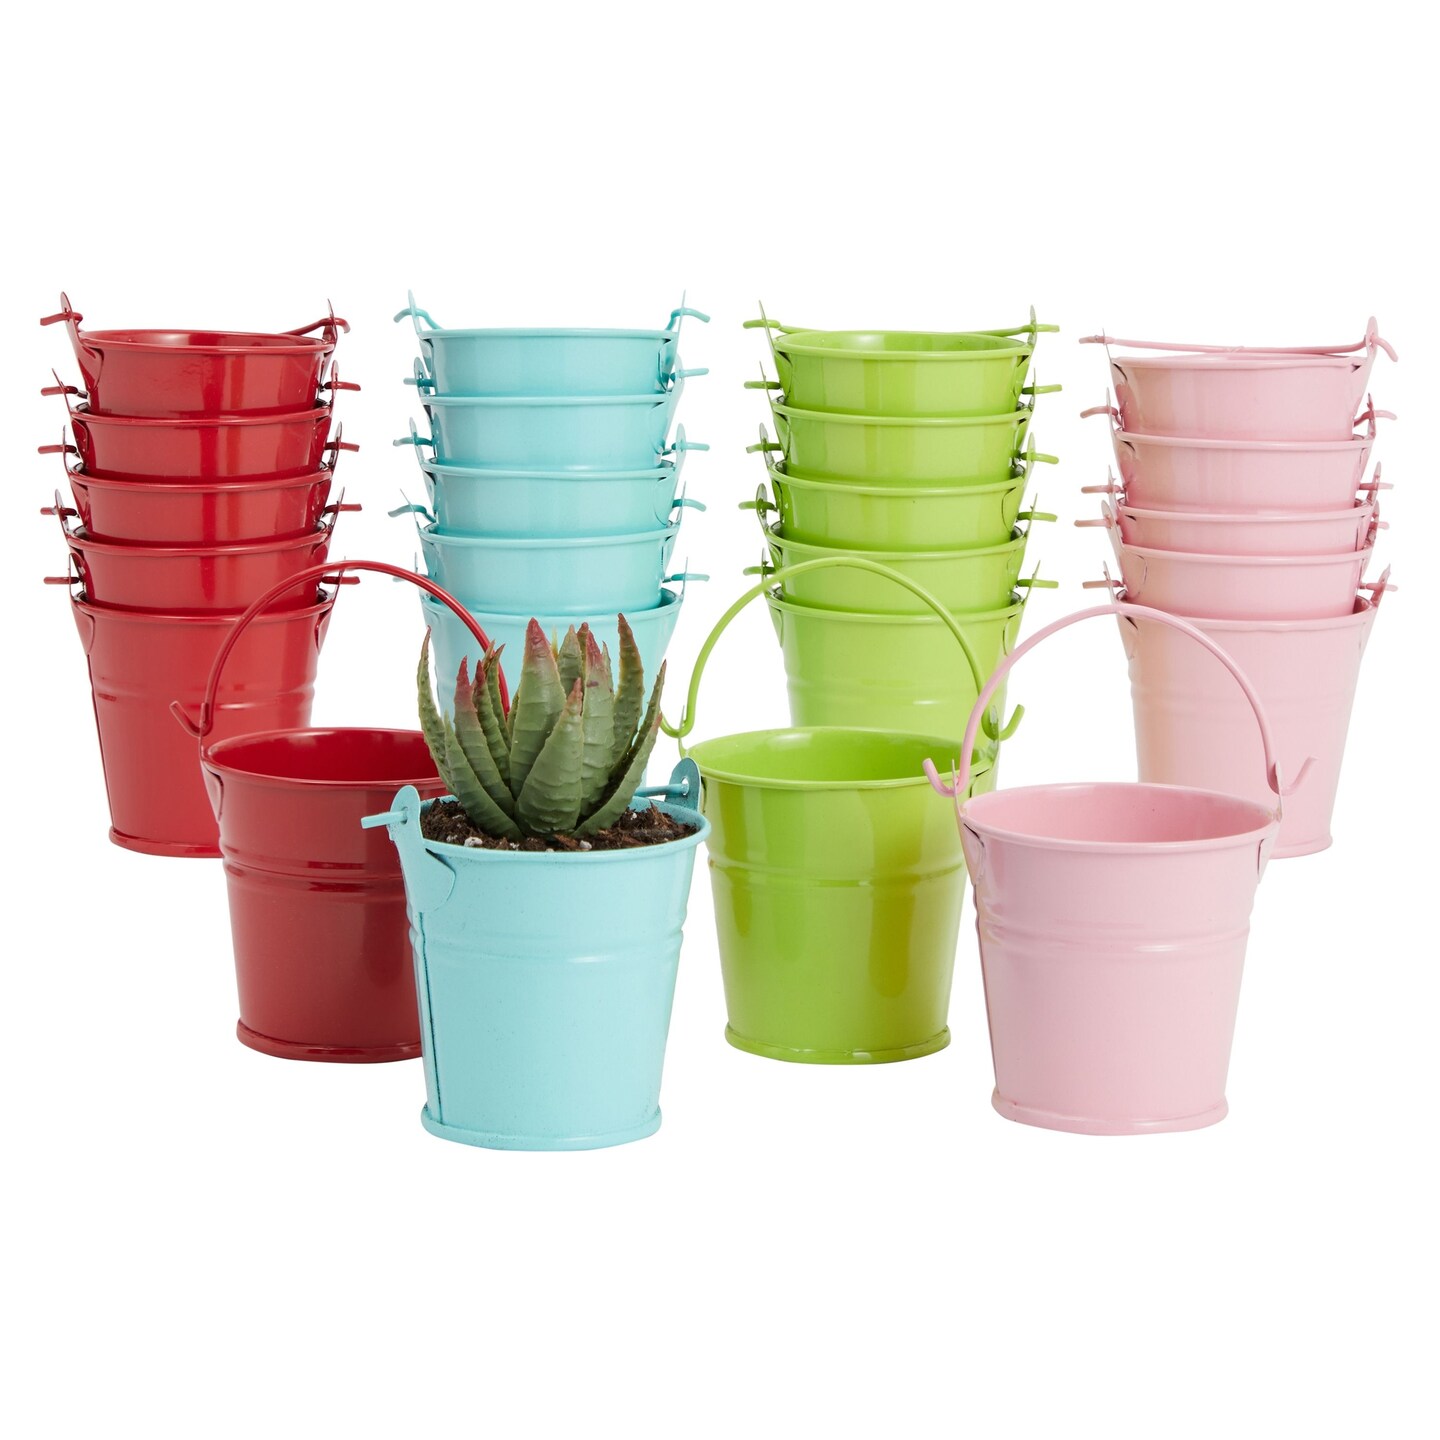 Small Mini Bucket With Handle For Kids Craft Party Customized Candy Flower  Mini Pot Colored Galvanized